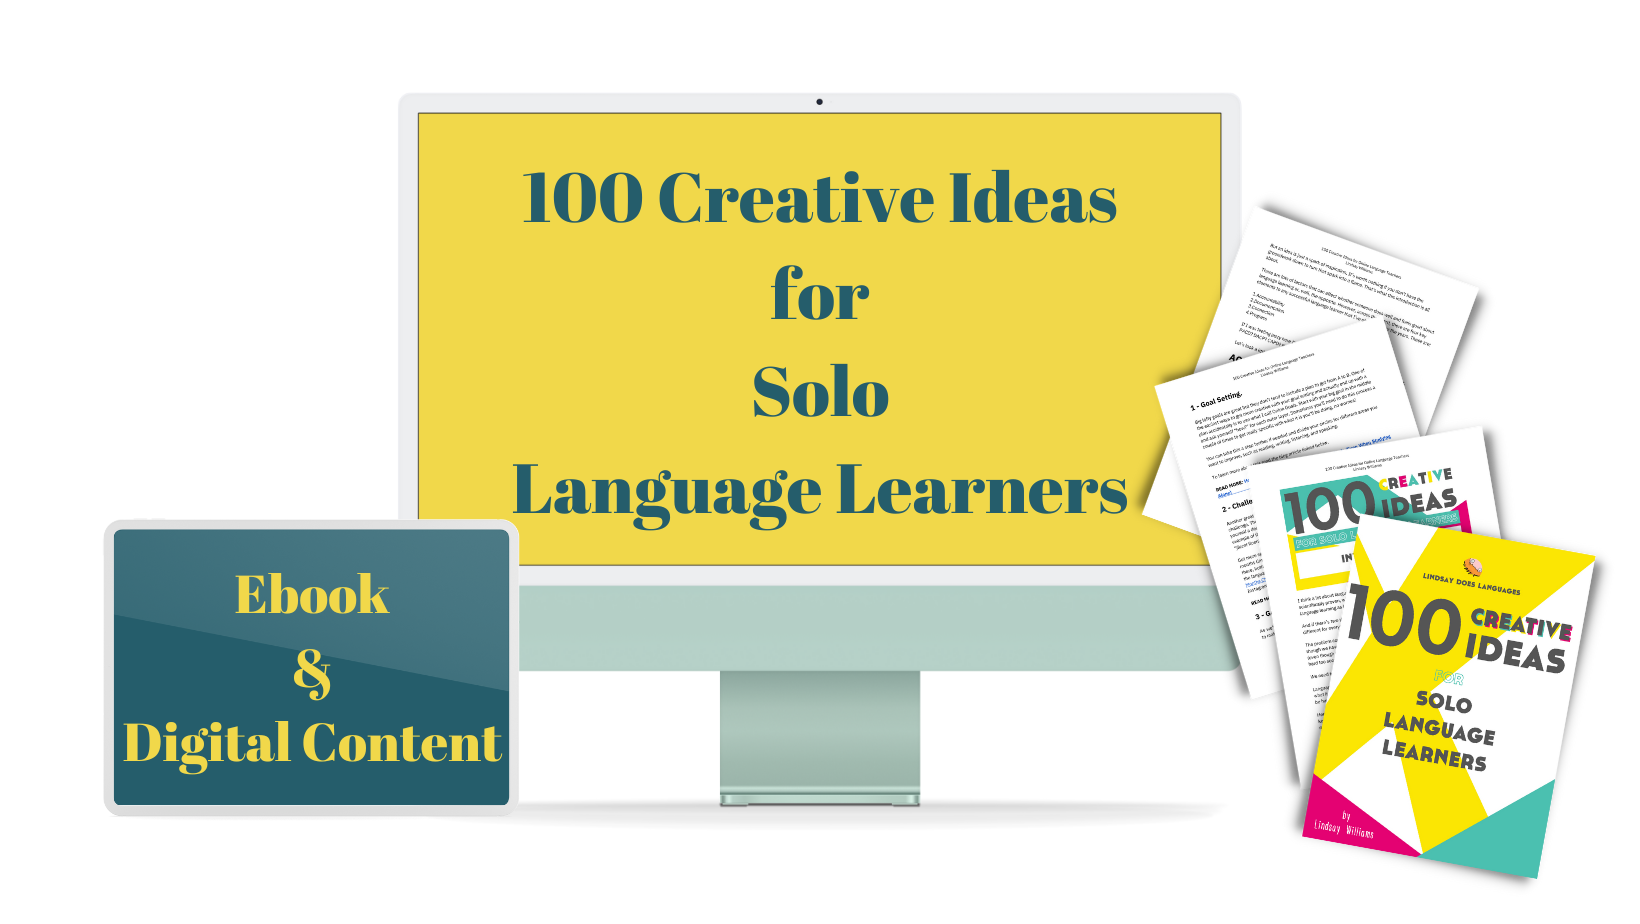 100 Creative Ideas for Solo Language Learners to help you learn a language from Lindsay Does Languages. Image shows the program title on a computer screen alongside some pages from the ebook.